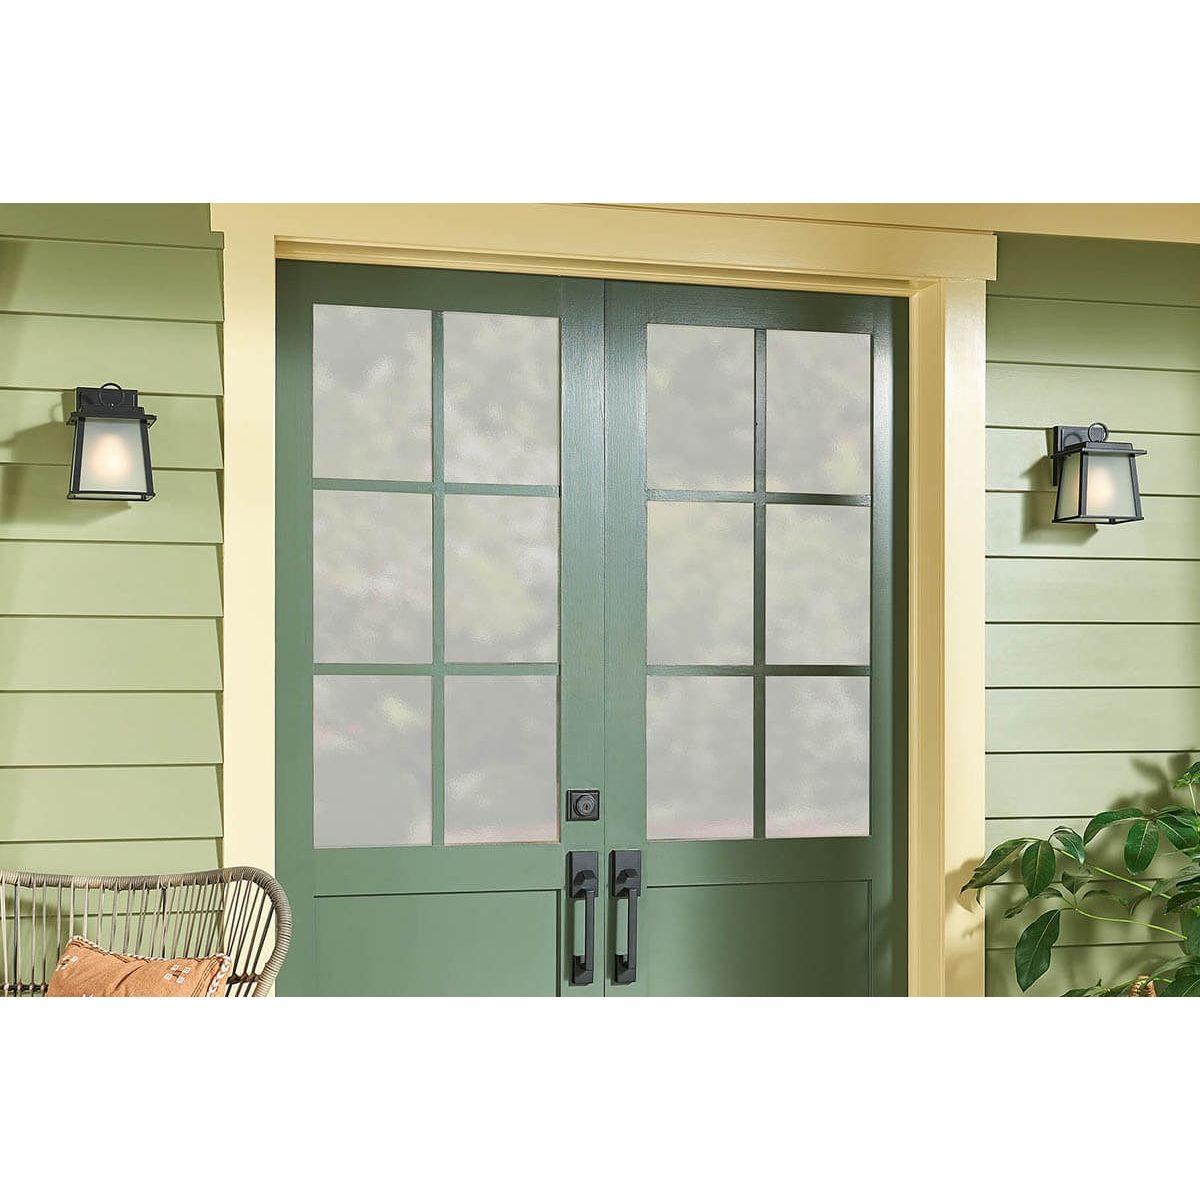 Noward 9 in. Outdoor Wall Sconce